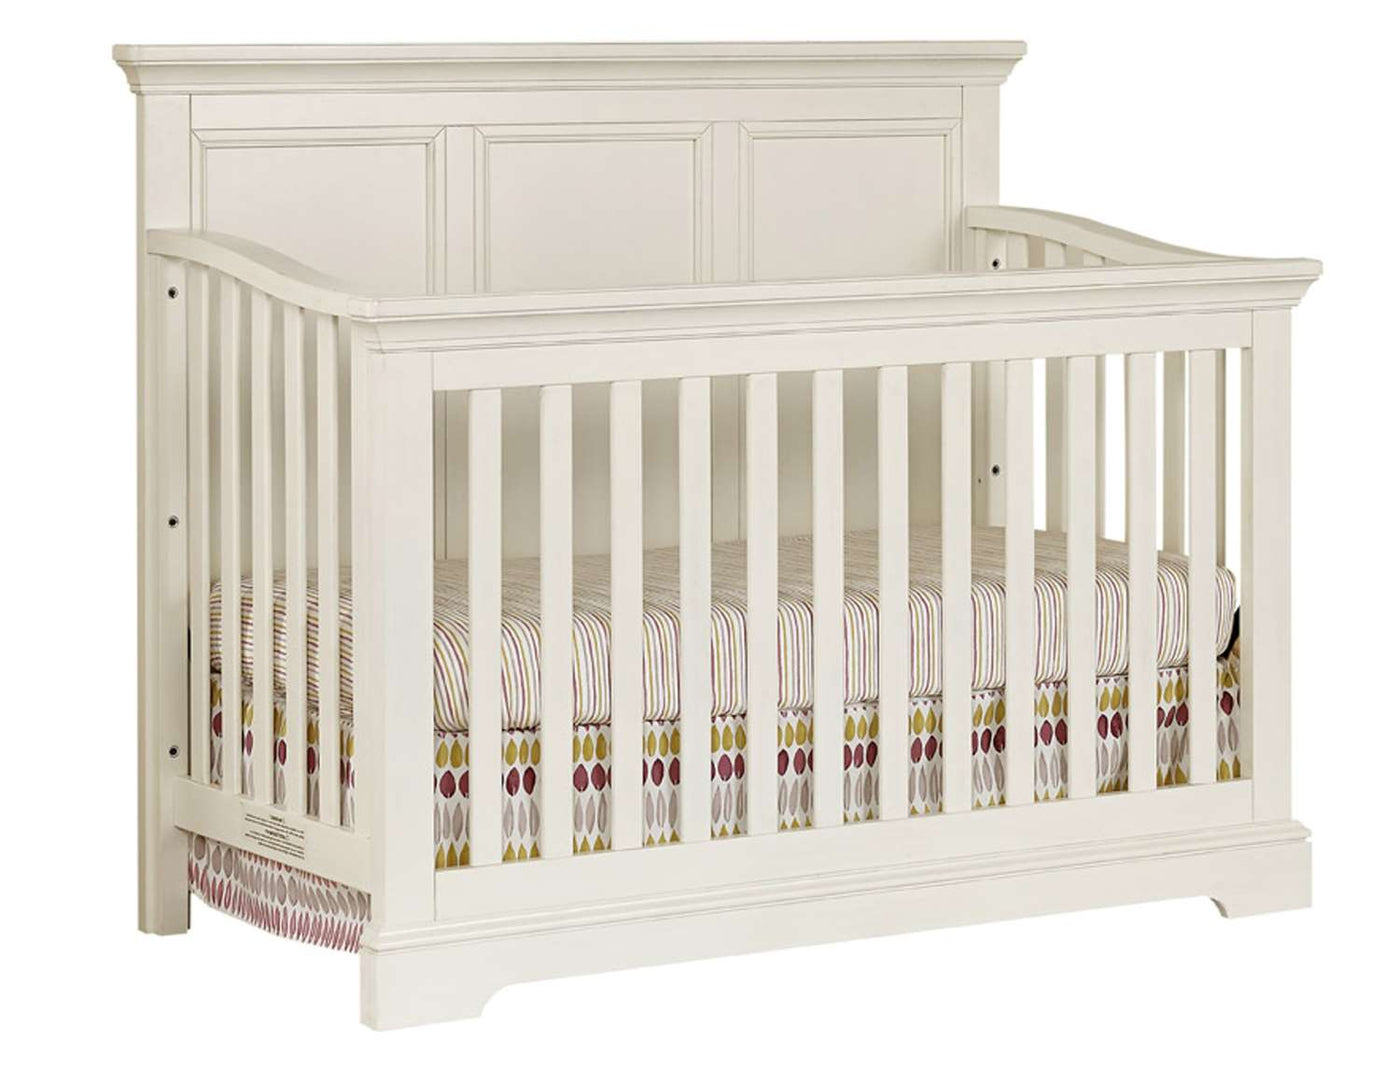 Hanley Convertible Crib with Toddler Guard Rail Package - Chalk